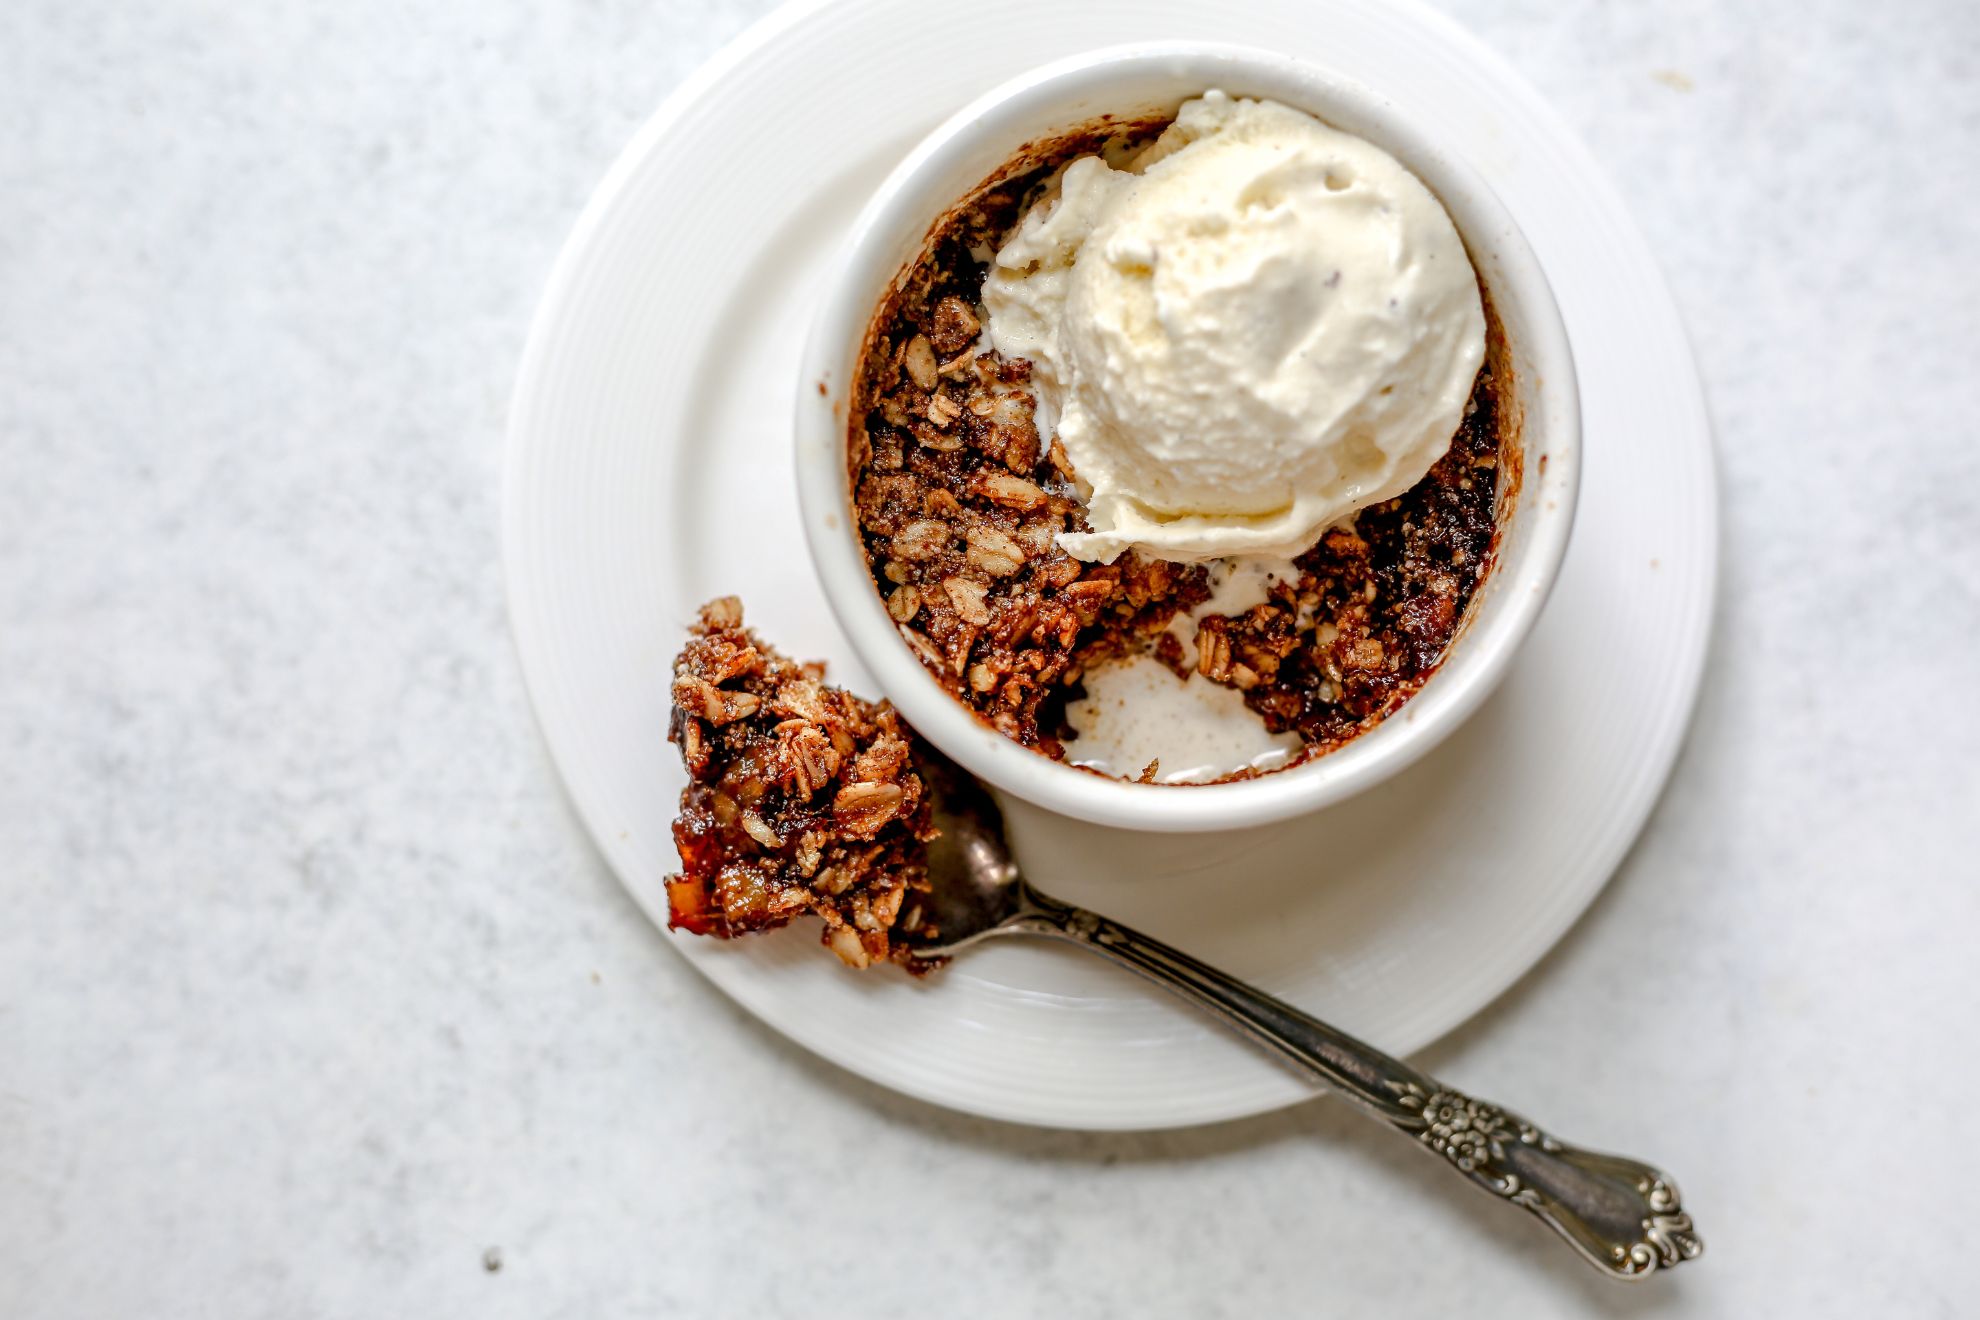 This is an overhead horizontal image of a small white ramekin with a baked apple oat crisp in it. A big scoop of vanilla ice cream is on top of the crisp. The ramekin is on a small white plate. A silver spoon has scooped a bite of the apple crisp out and is lying next to the ramekin on the plate. The plate sits on a light grey surface.